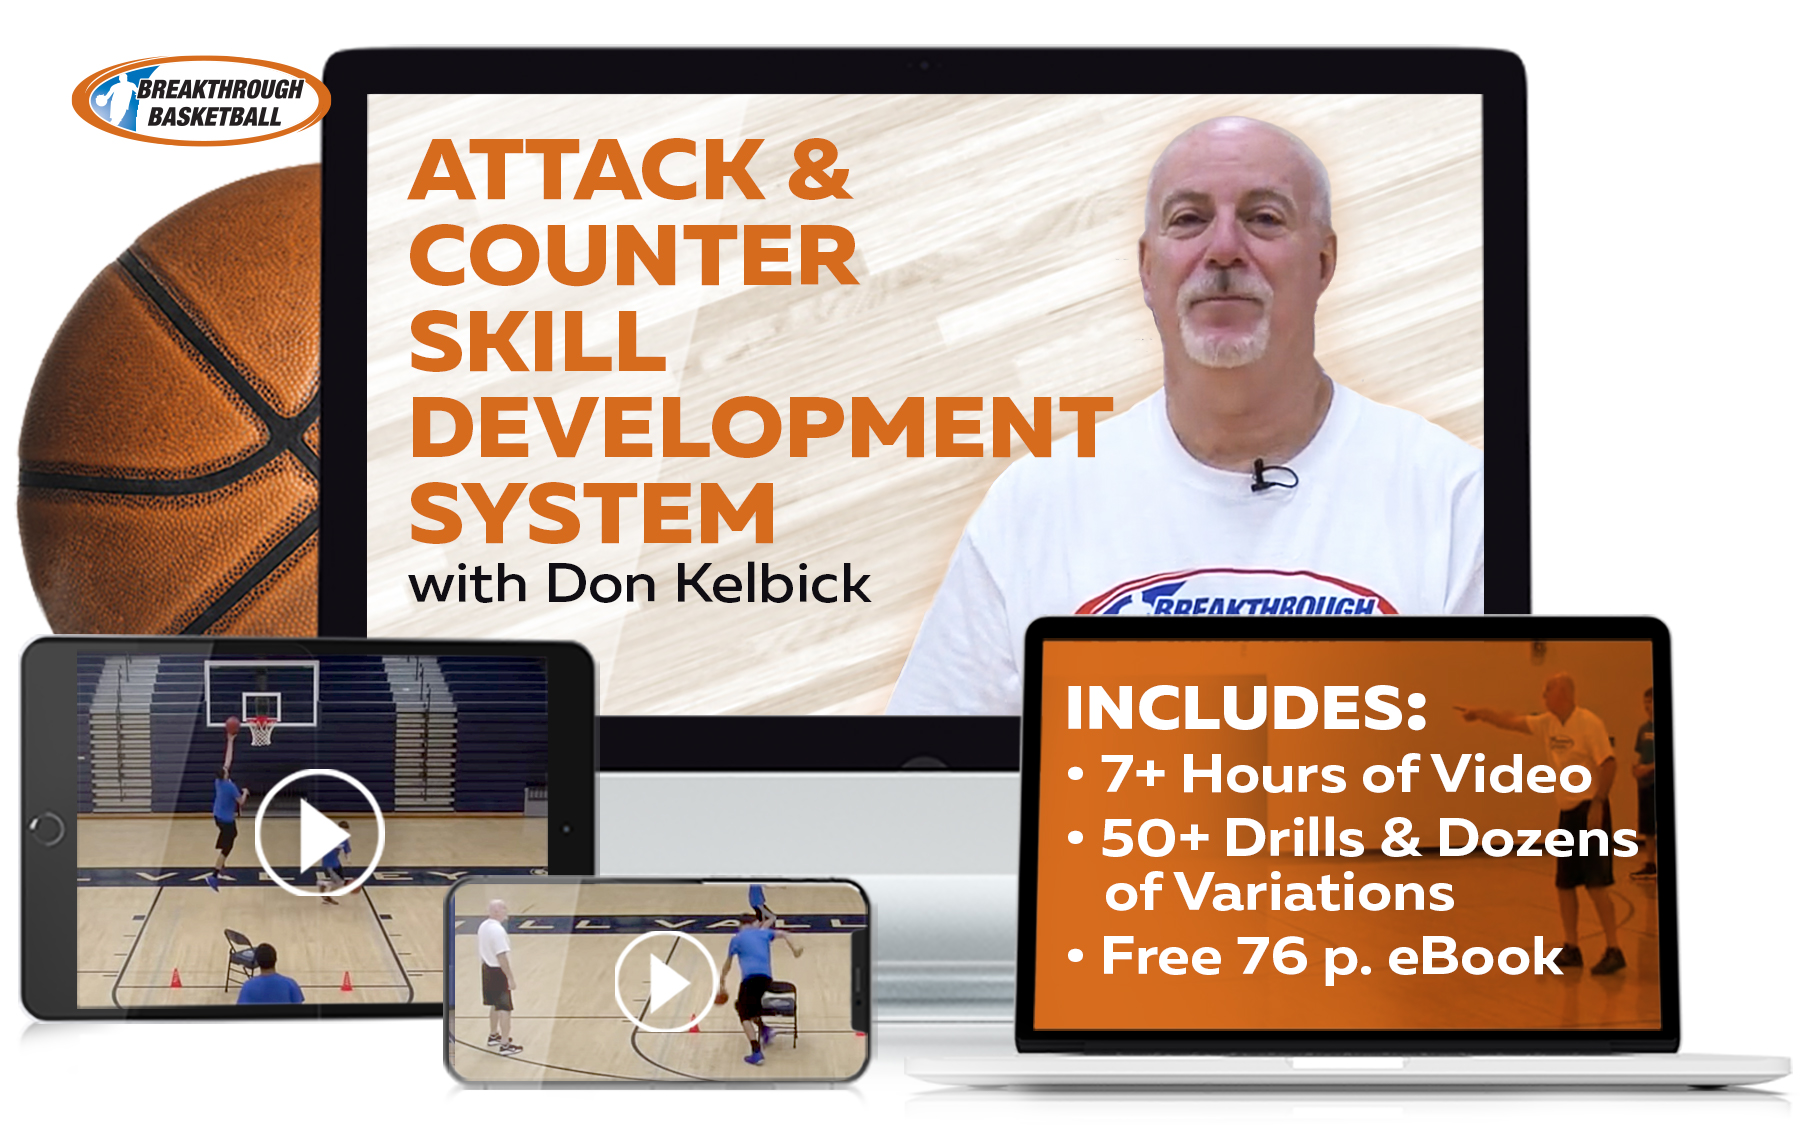 The Attack and Counter Skill Development System